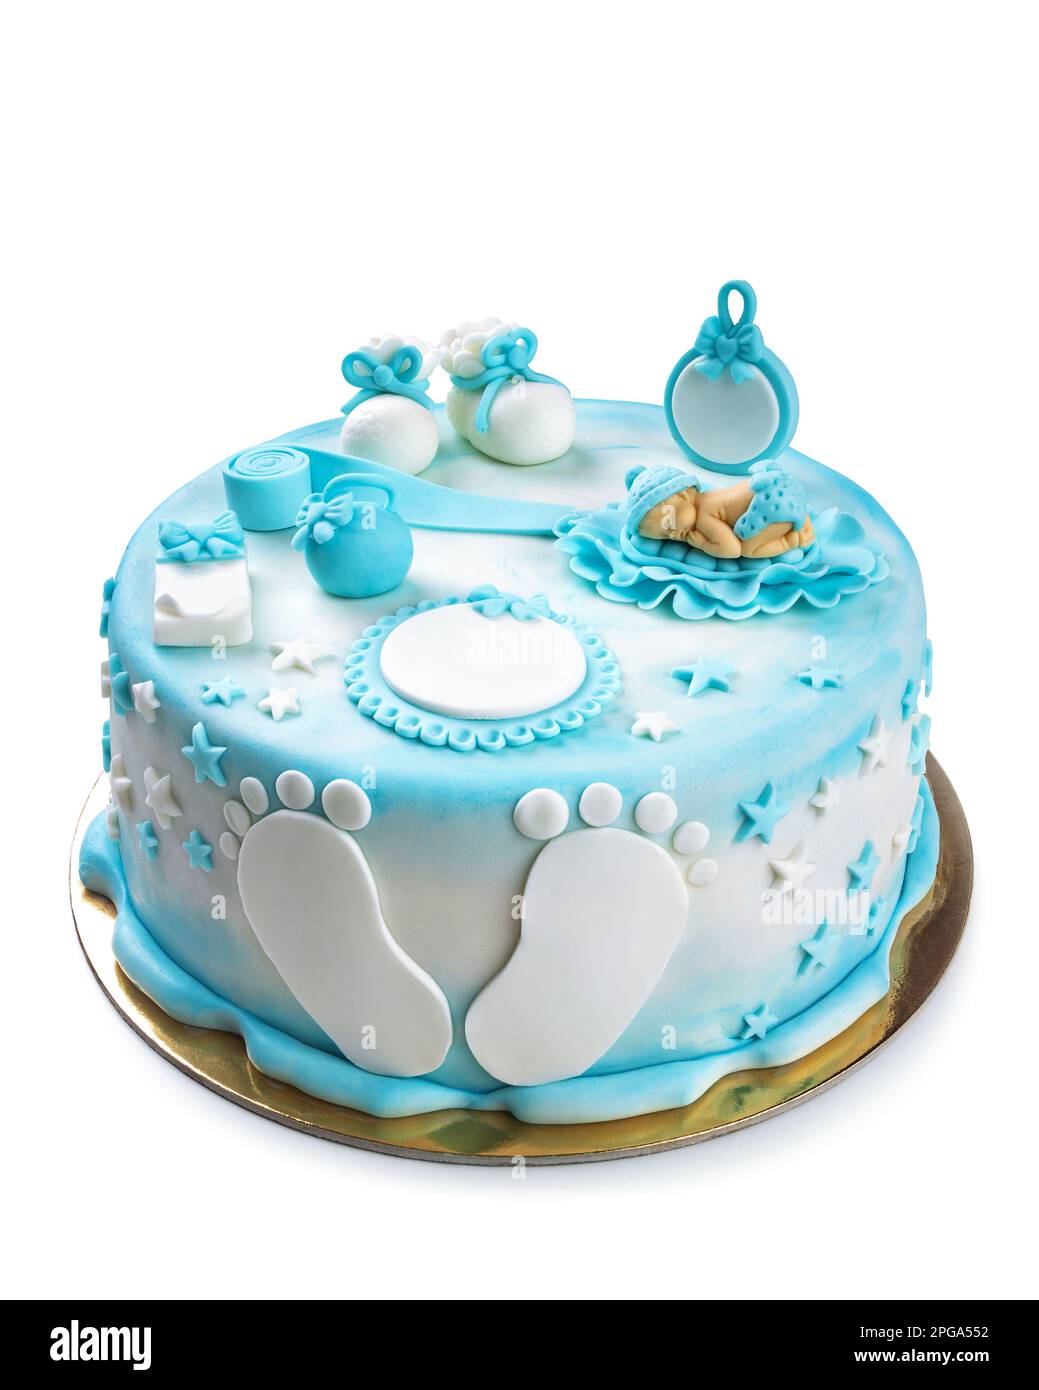 White and blue colored cake with a sleeping baby on top and some feet with booties for a baby's birthday isolated on white Stock Photo